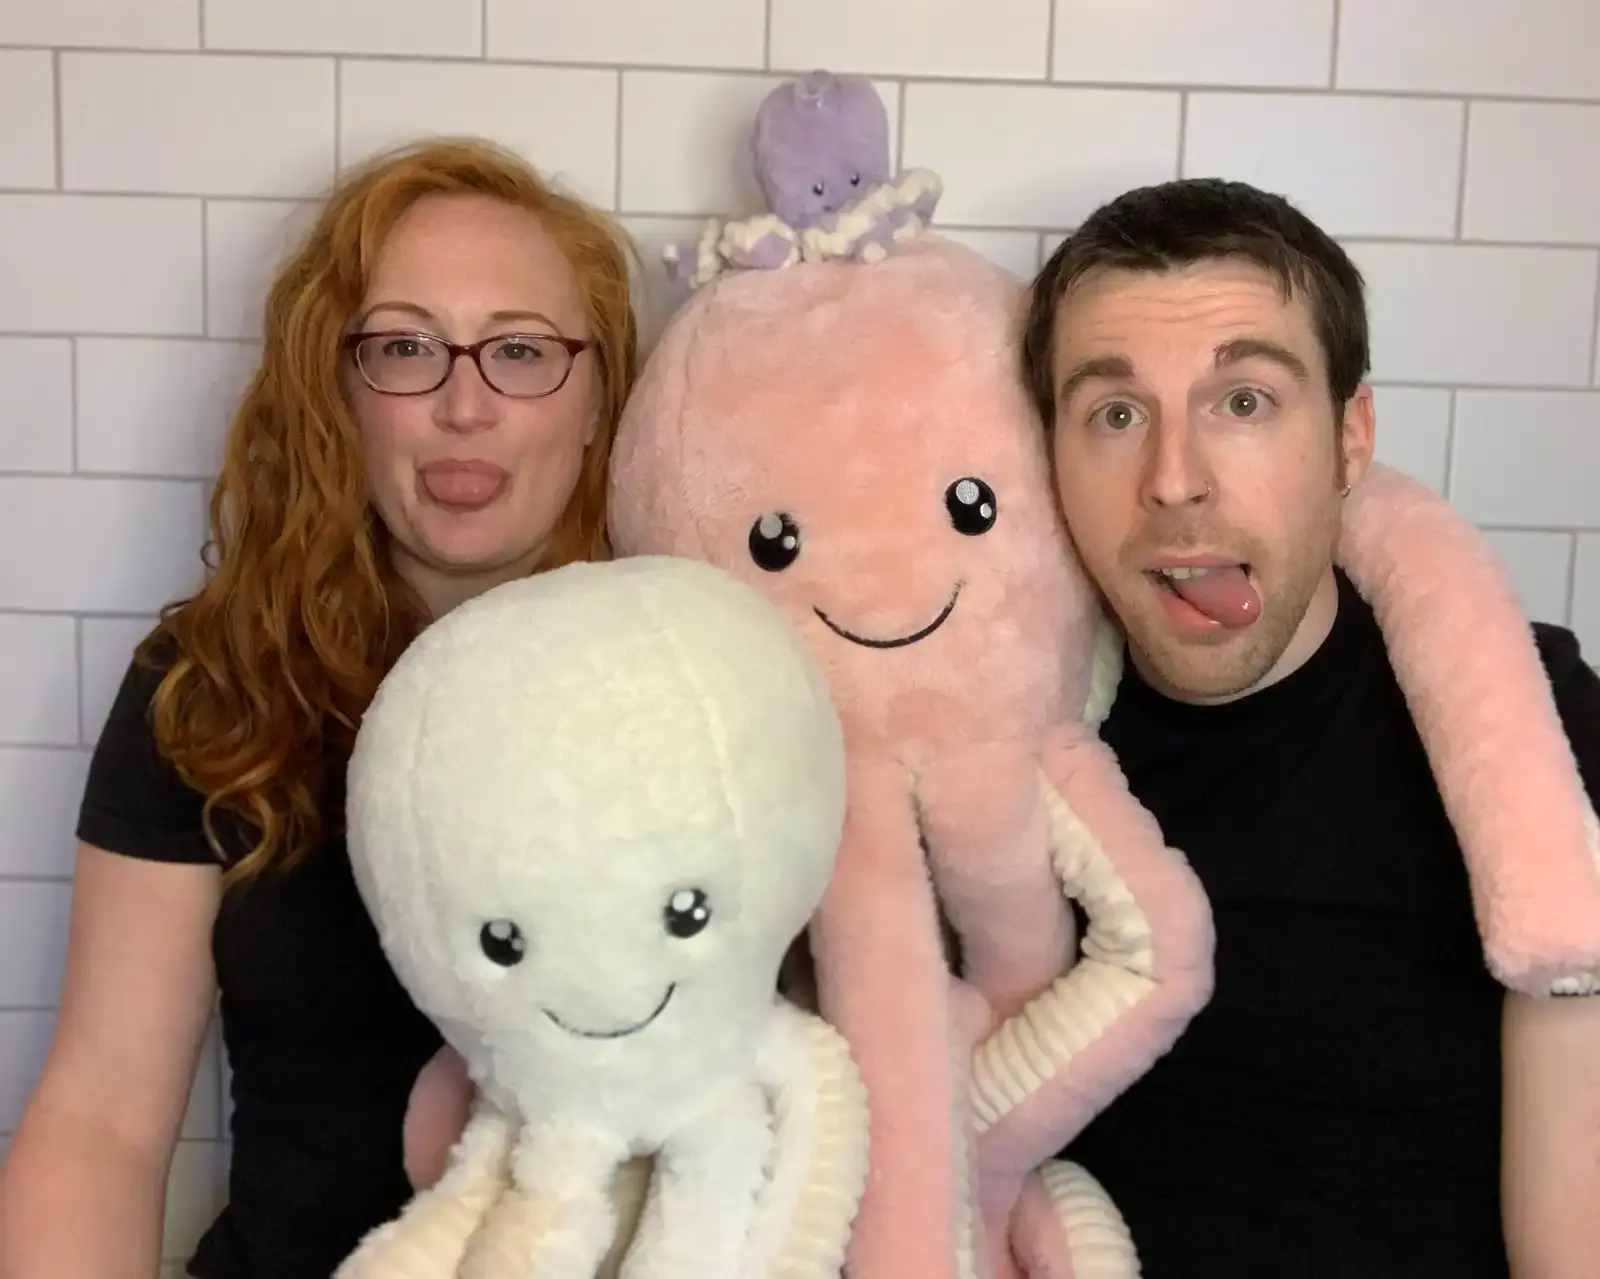 Photograph of a redheaded woman with glasses wearing a black t-shirt (Sarah) and a short-haired man (Matt), both sticking out their tongues non-seriously, surrounded by stuffed octopus toys of various sizes.